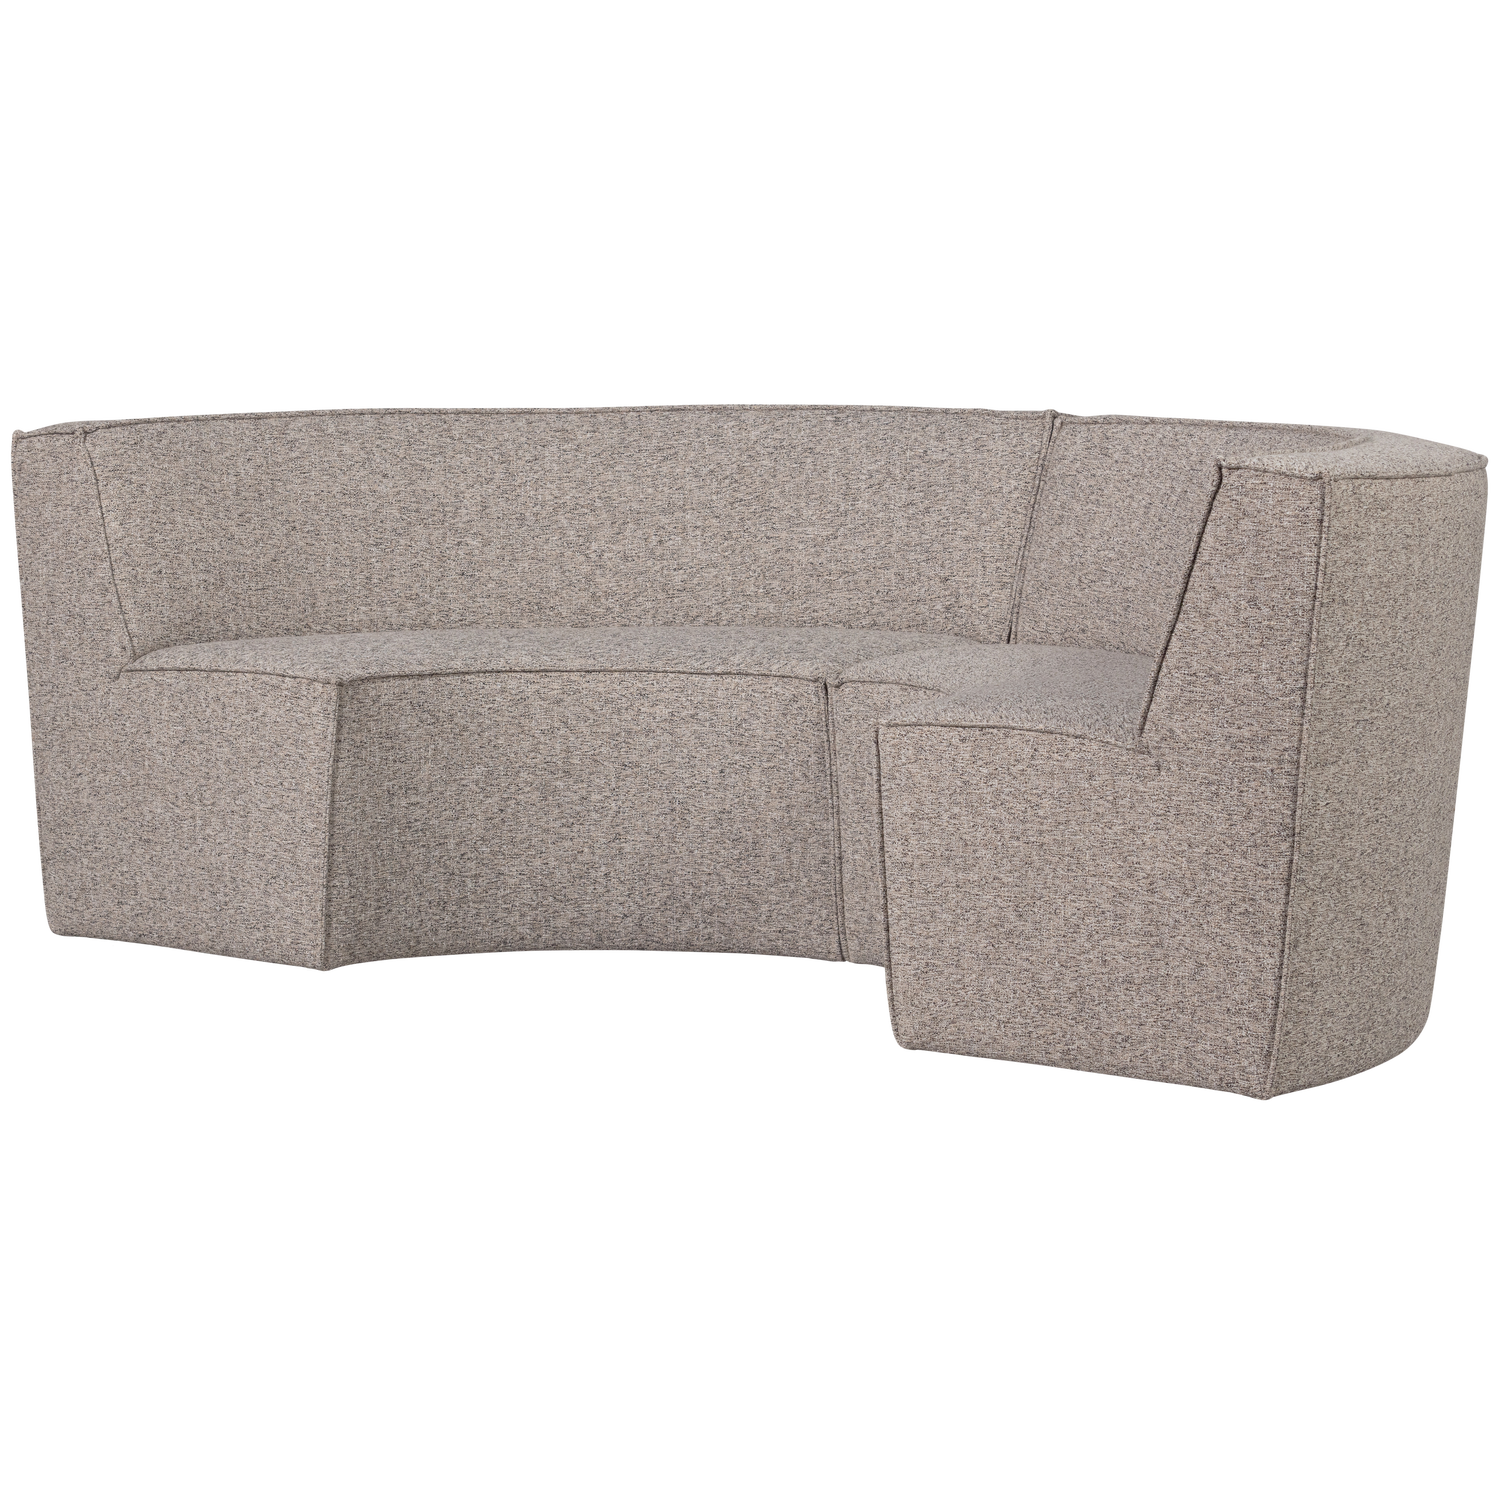 EUROPA 4-SEATER DINING BENCH WOVEN FABRIC SAND MELANGE